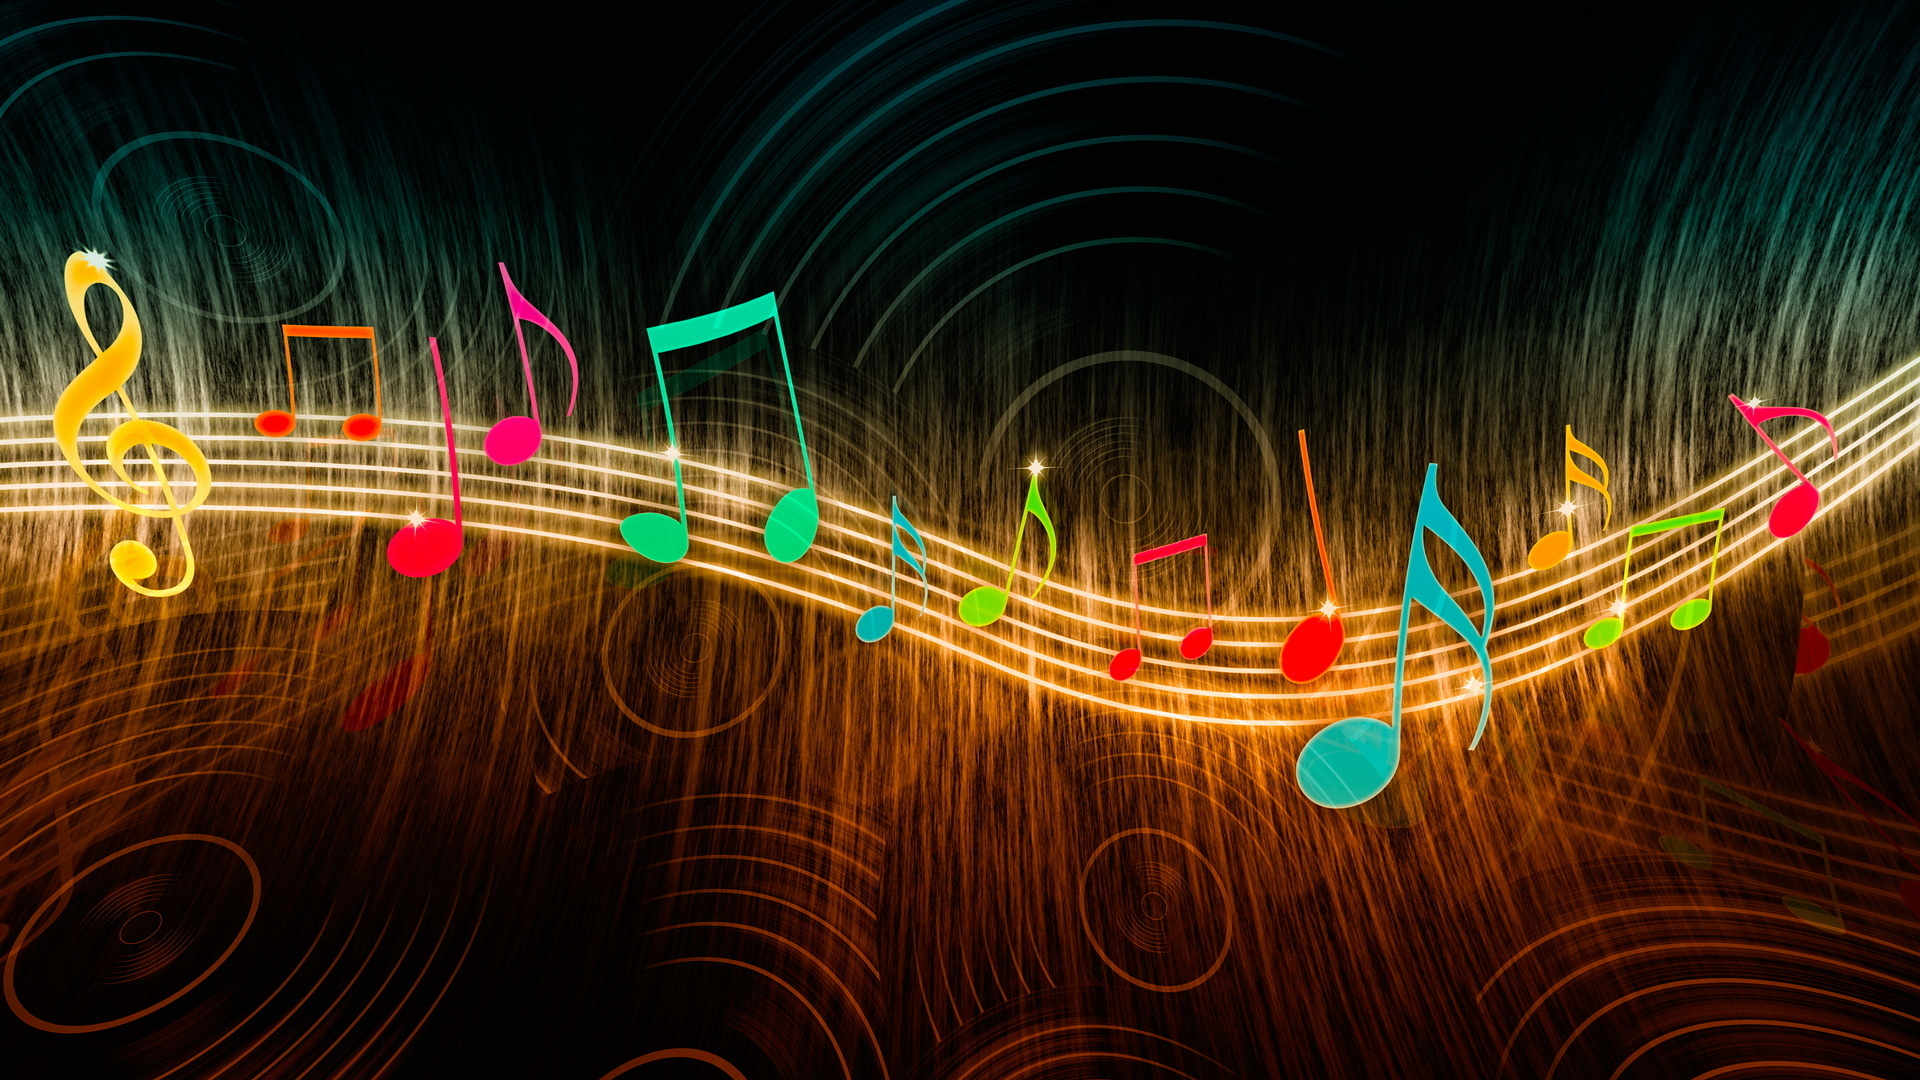 Wallpaper | Music | photo | picture | melody of the soul, melody of the  heart, the stave